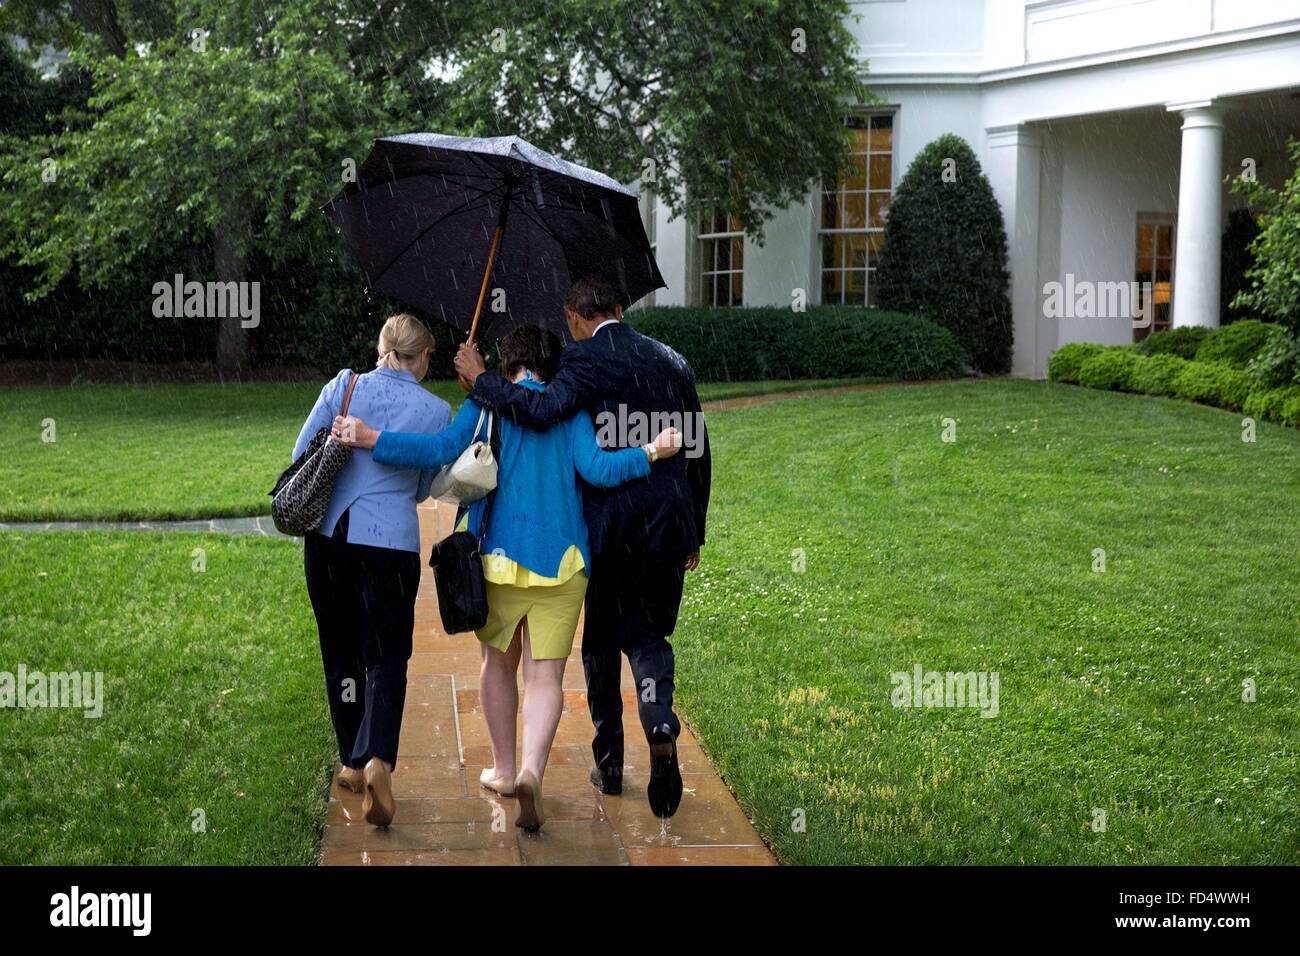 U.S. President Barack Obama holds an umbrella for aides Valerie Jarrett and Anita Decker Breckenridge after returning on Marine One to the West Wing of the White House May 18, 2015 in Washington, DC. Stock Photo